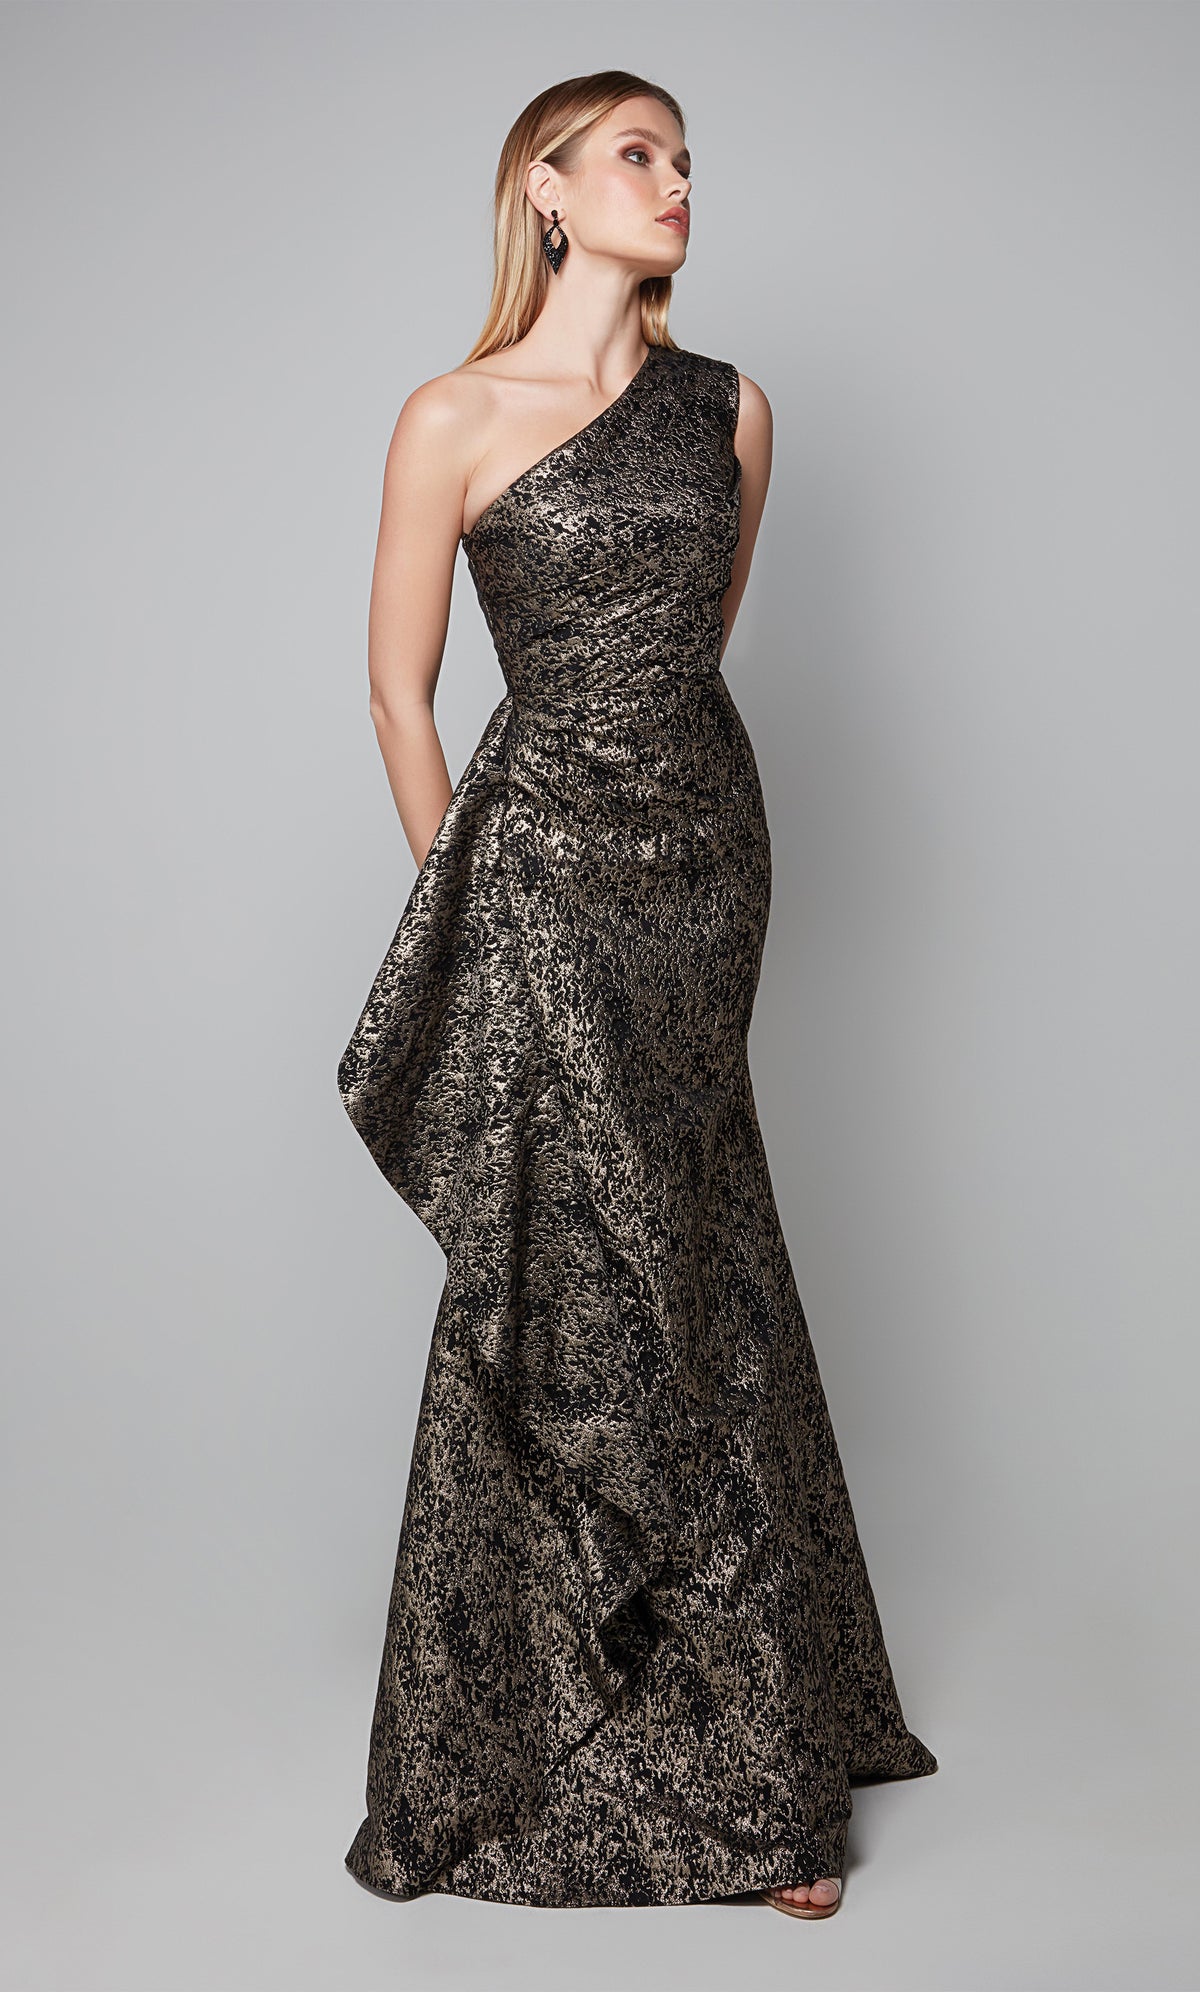 Chic one shoulder mother of the bride gown with side ruffle in black-gold.